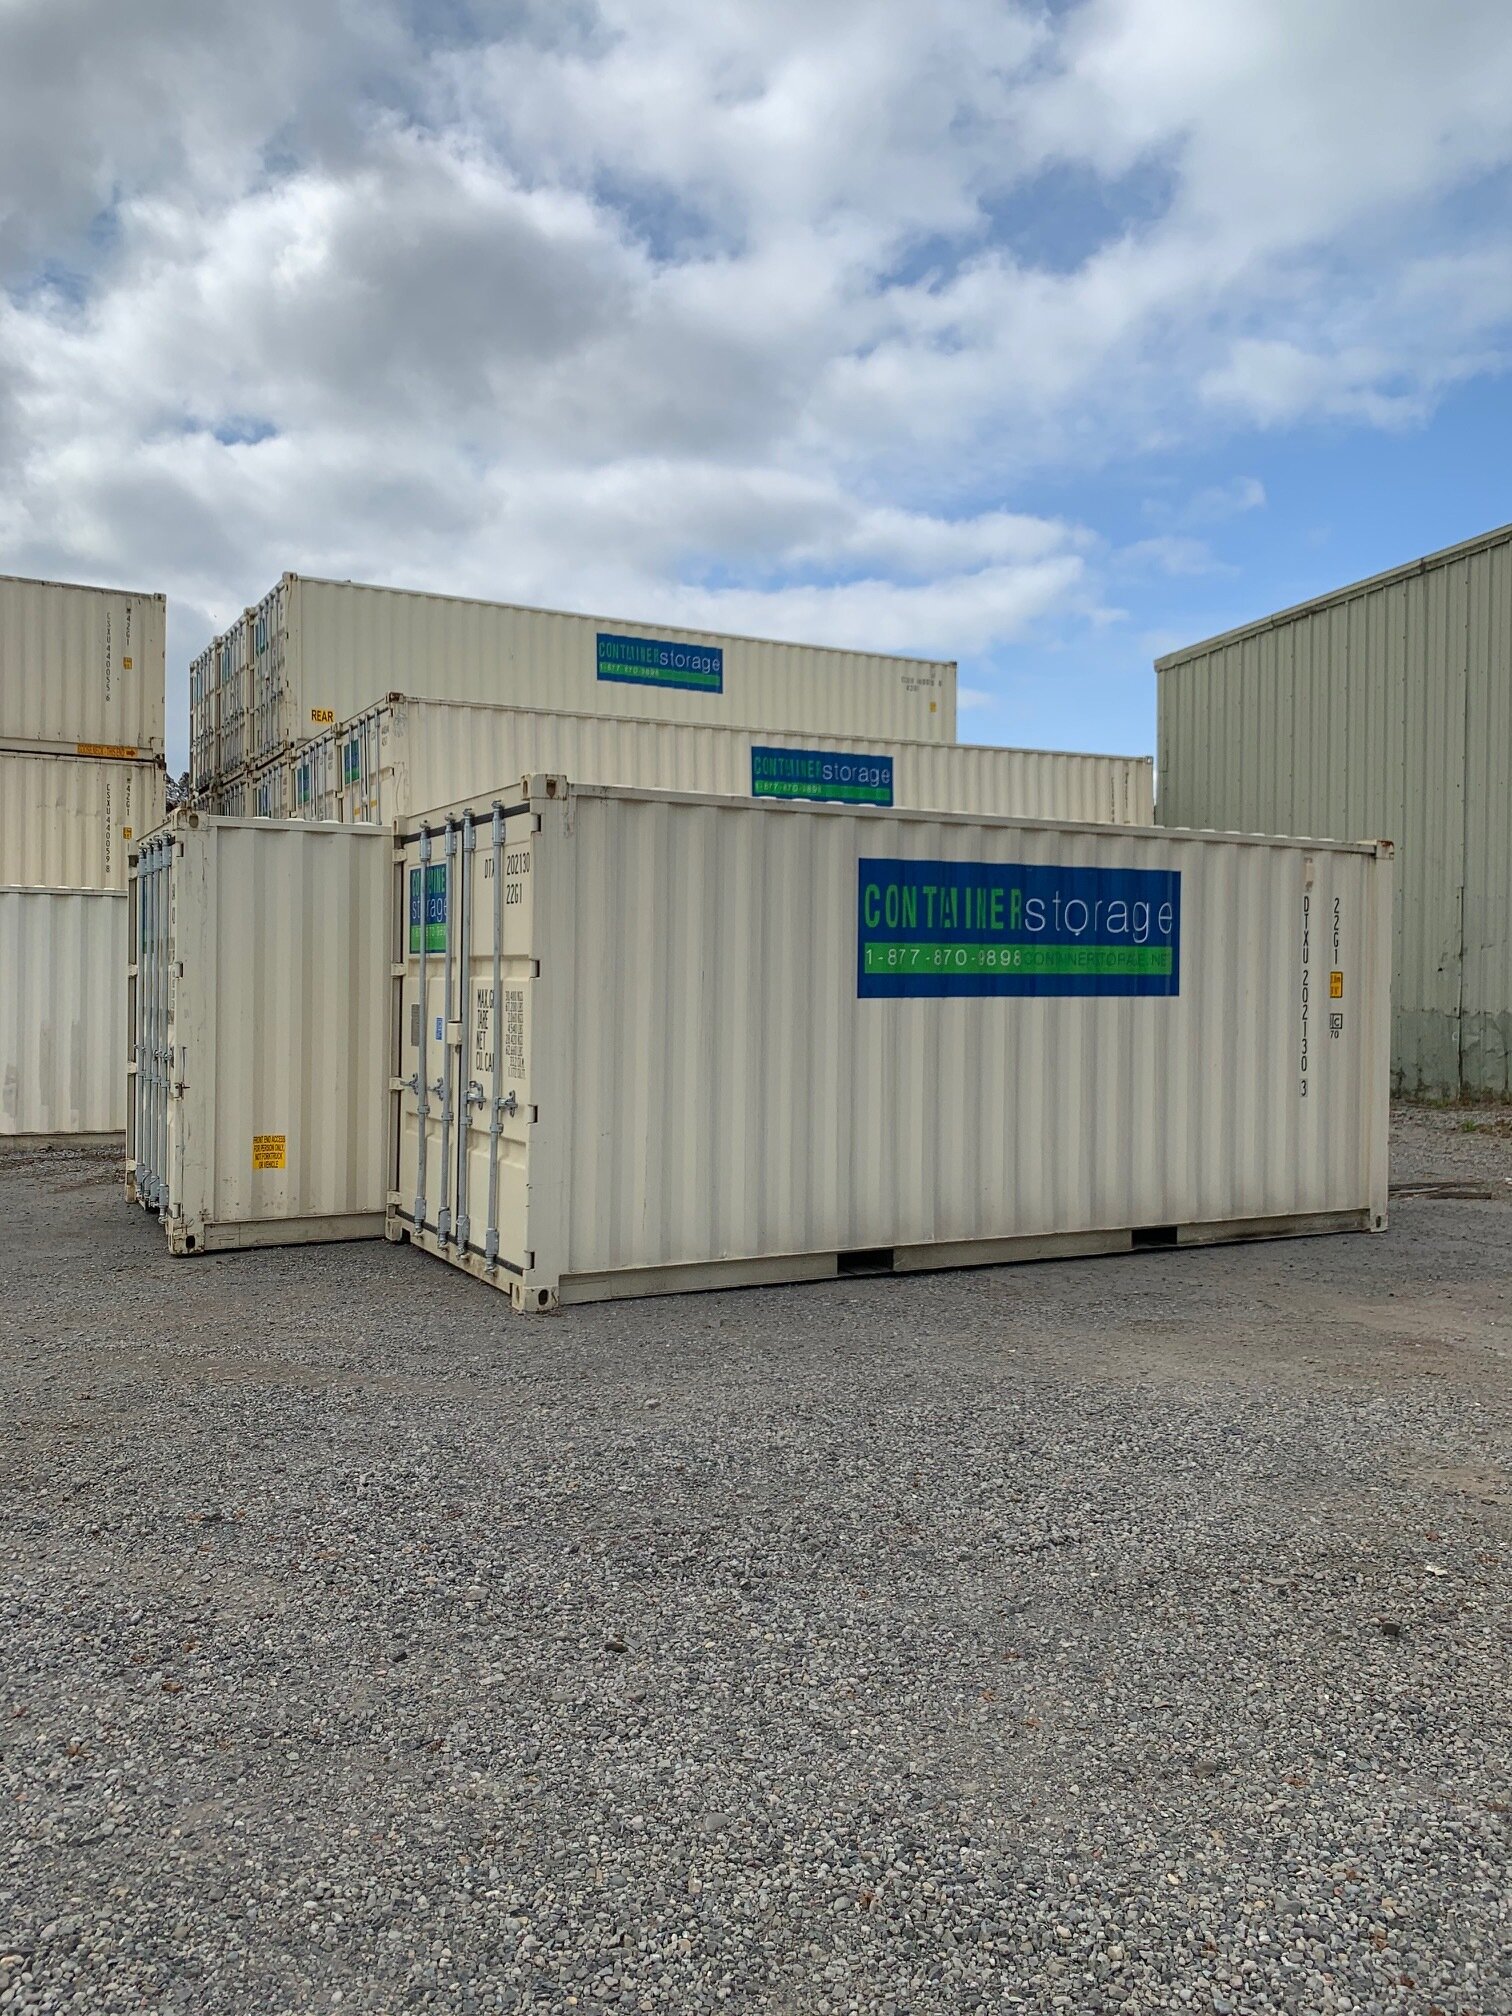 Excellent Customer Service from Container Storage — Container Storage ...